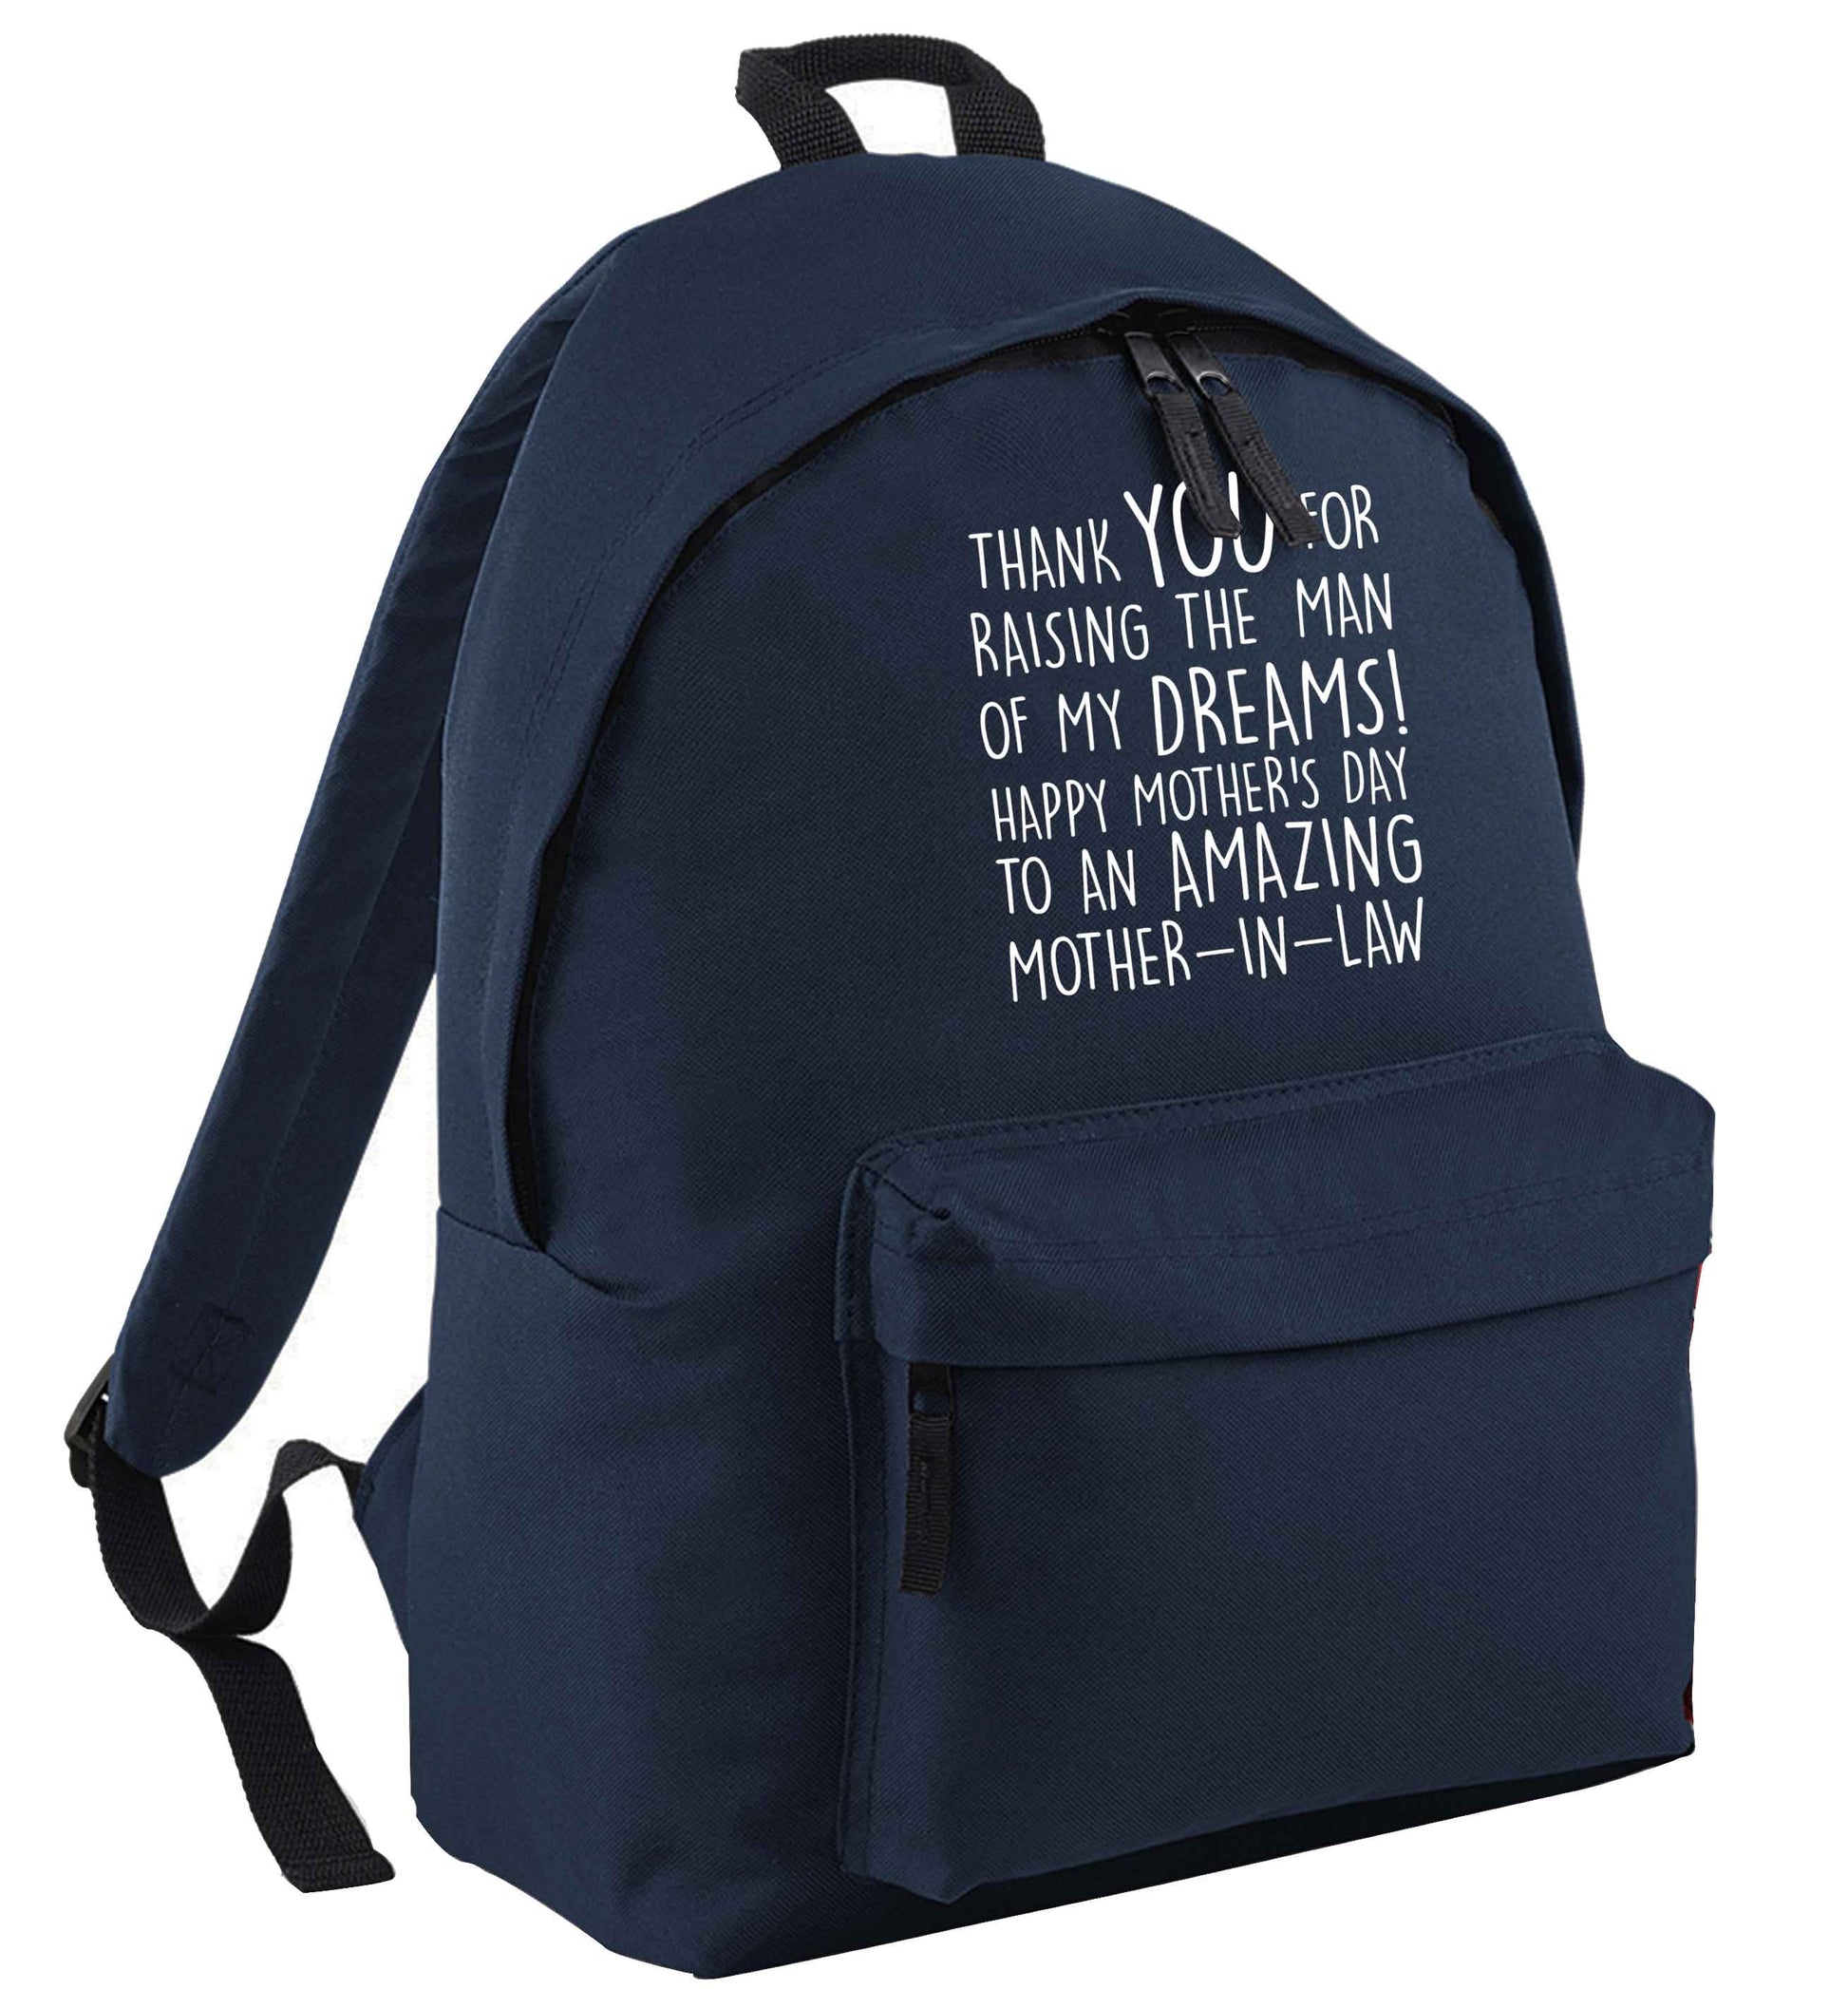 Raising the man of my dreams mother's day mother-in-law navy childrens backpack